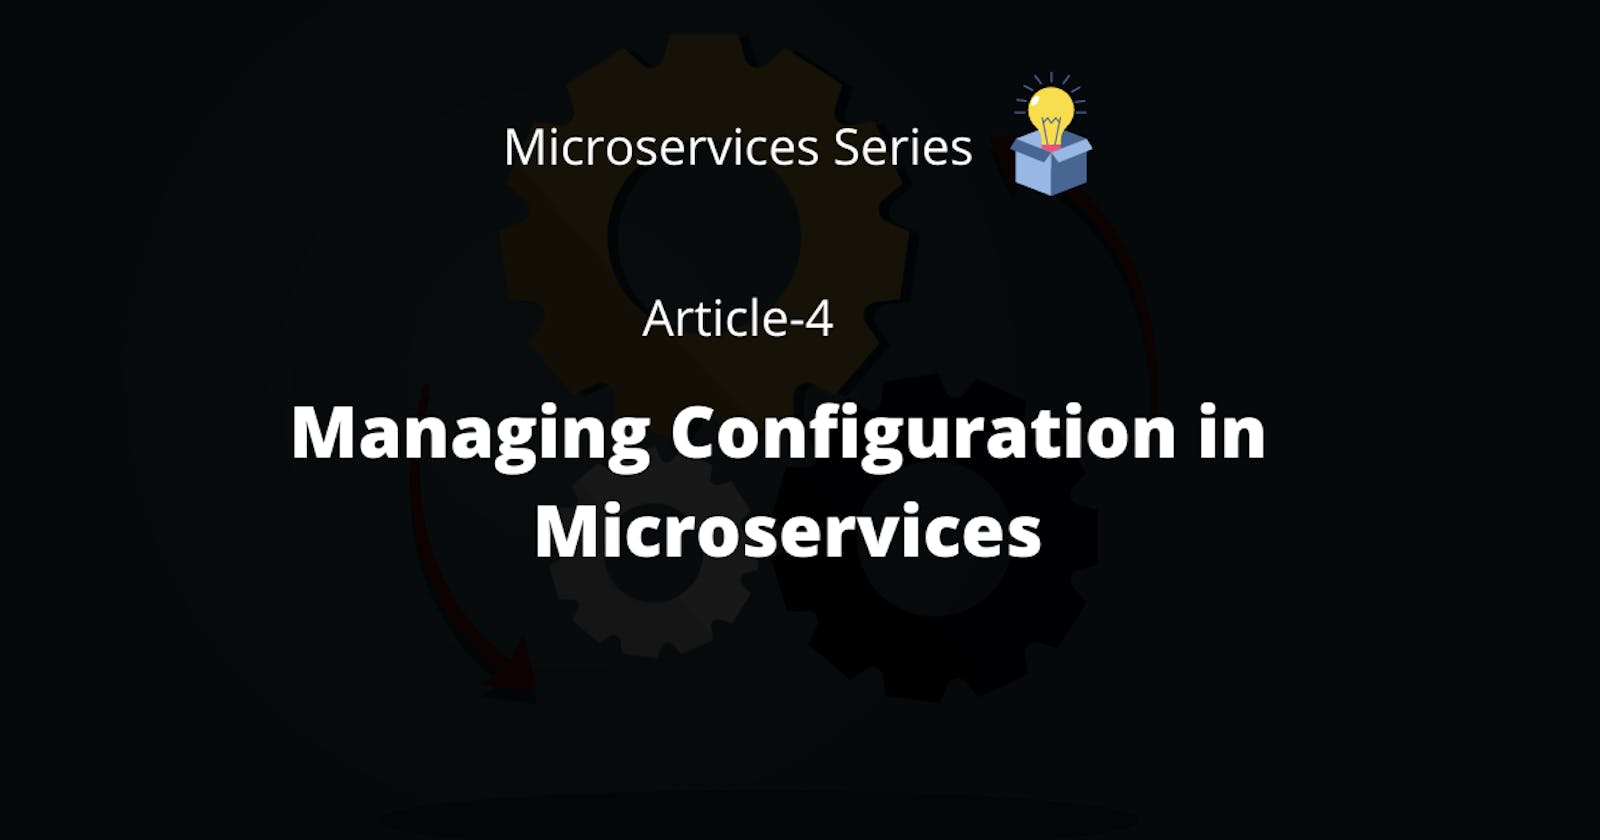 Managing Configuration in Microservices